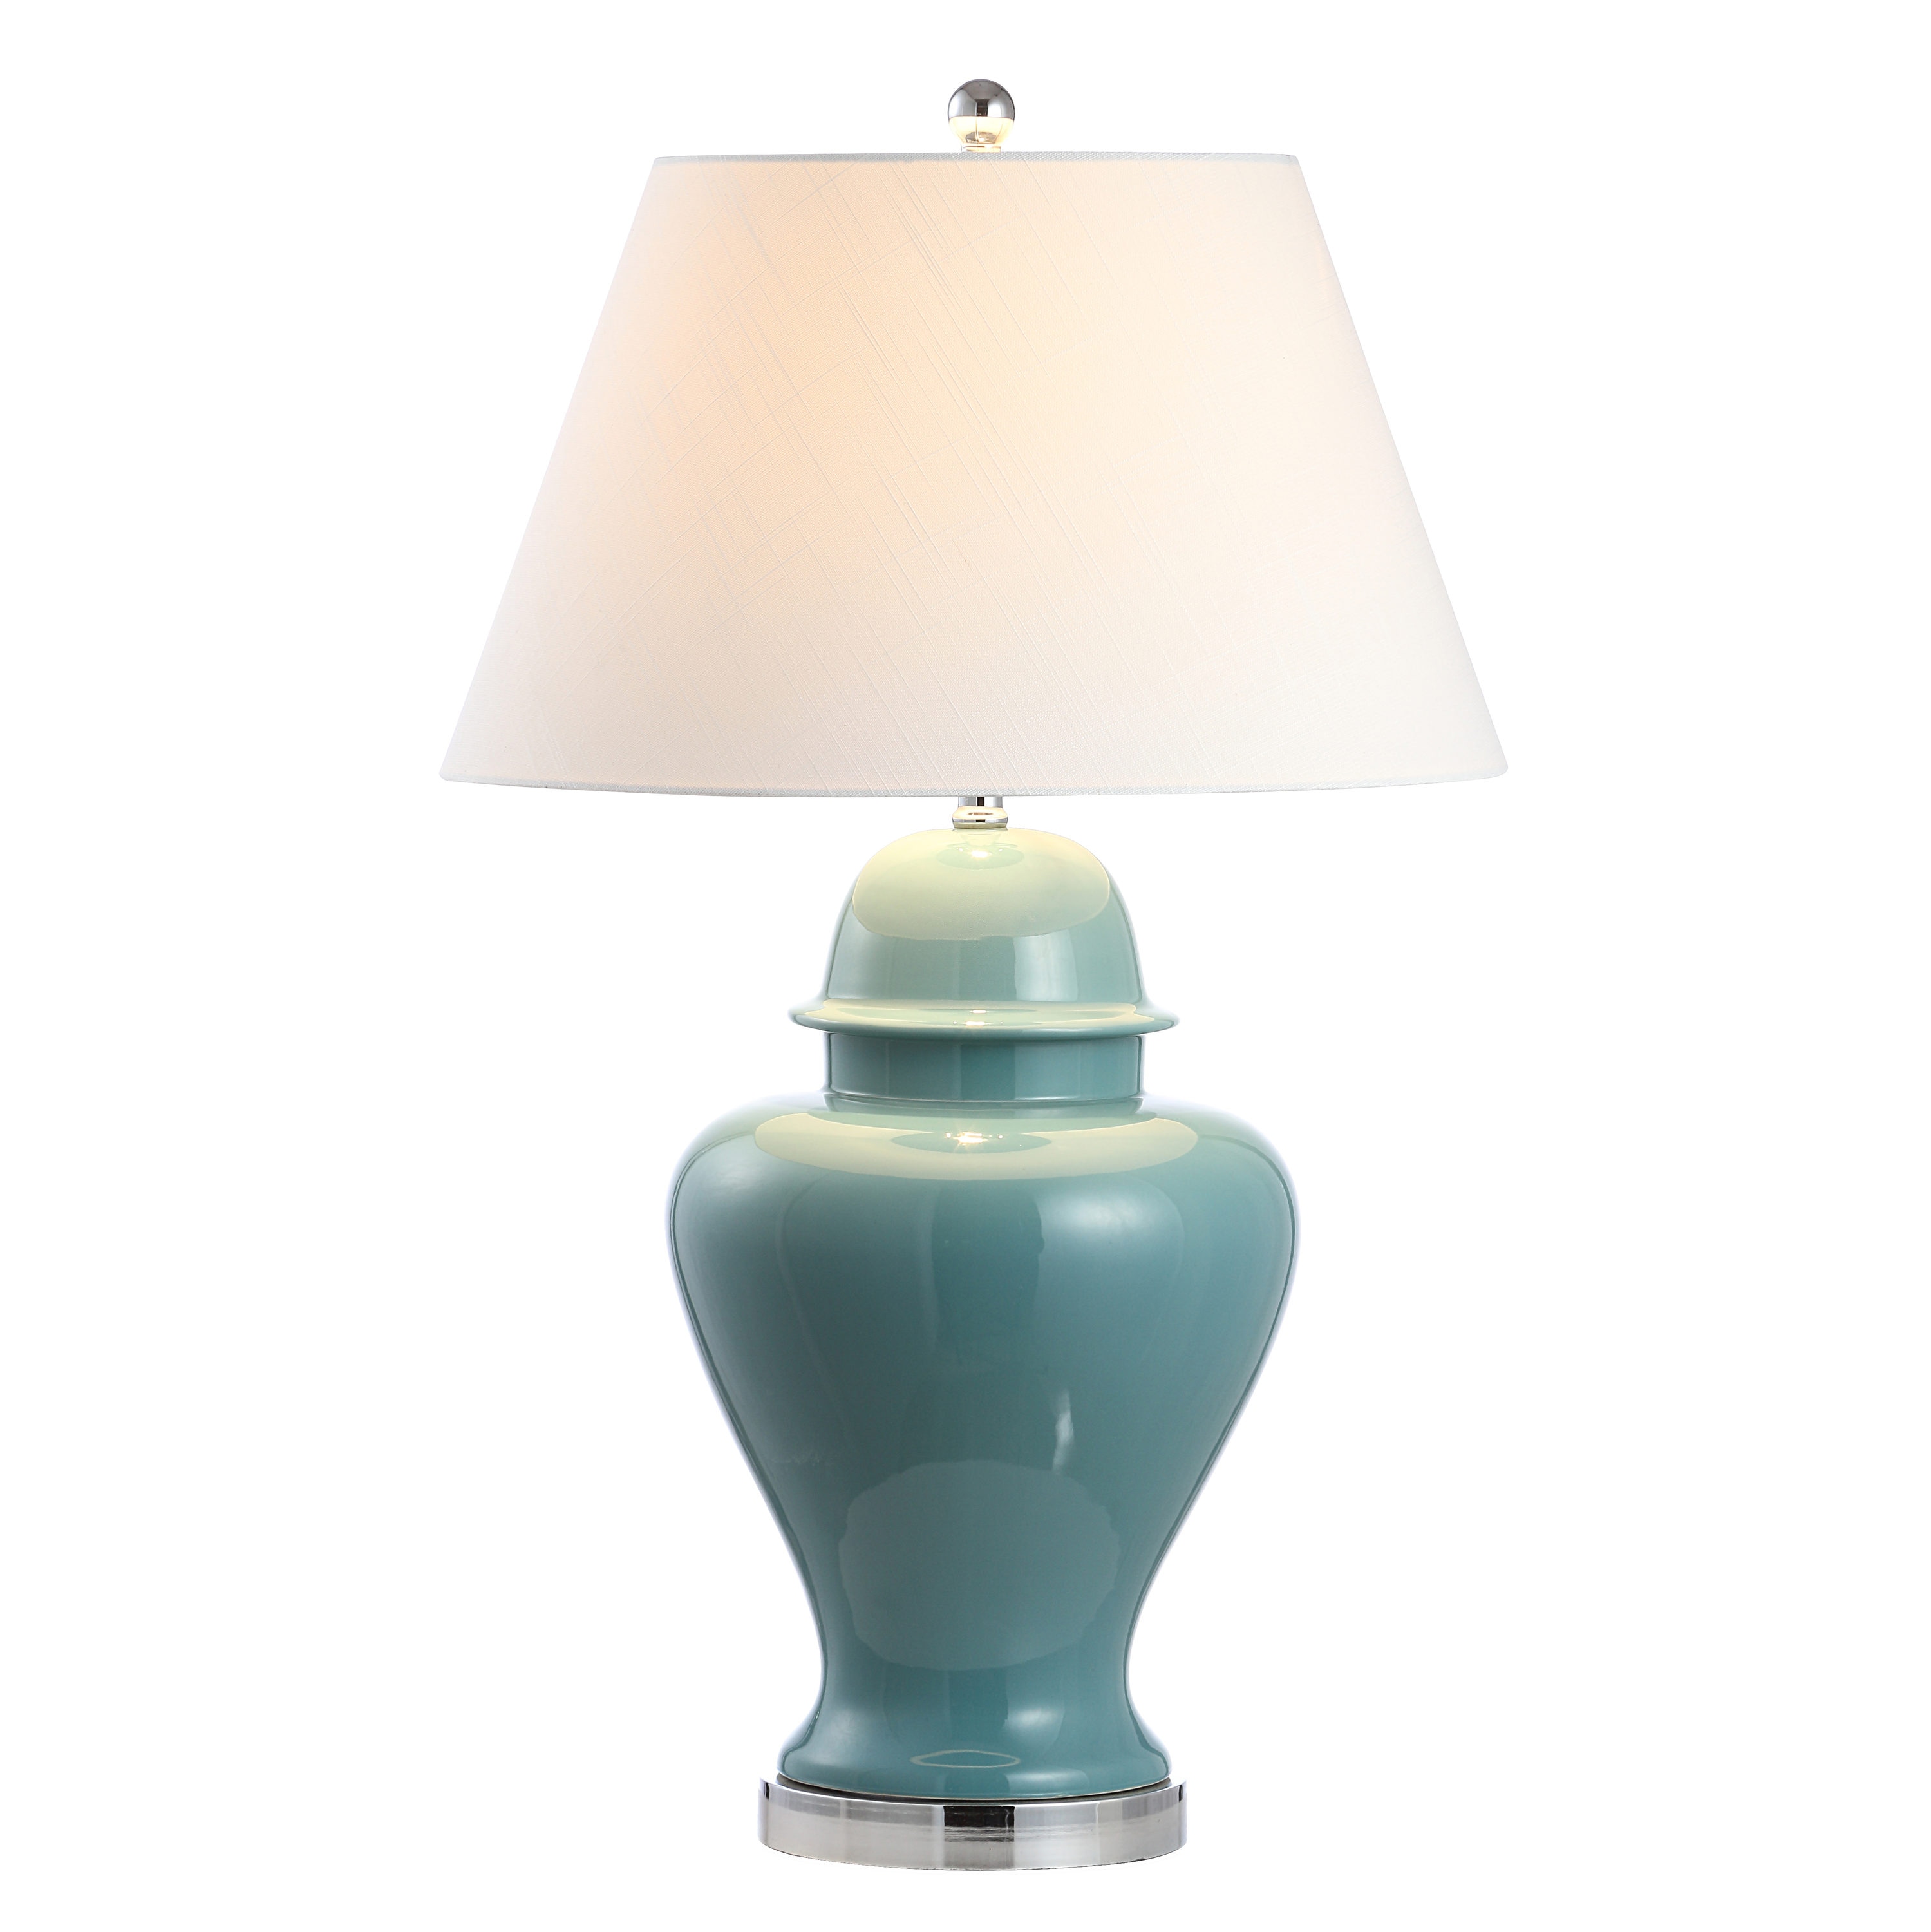 Modern Table Lamps at Lowes.com